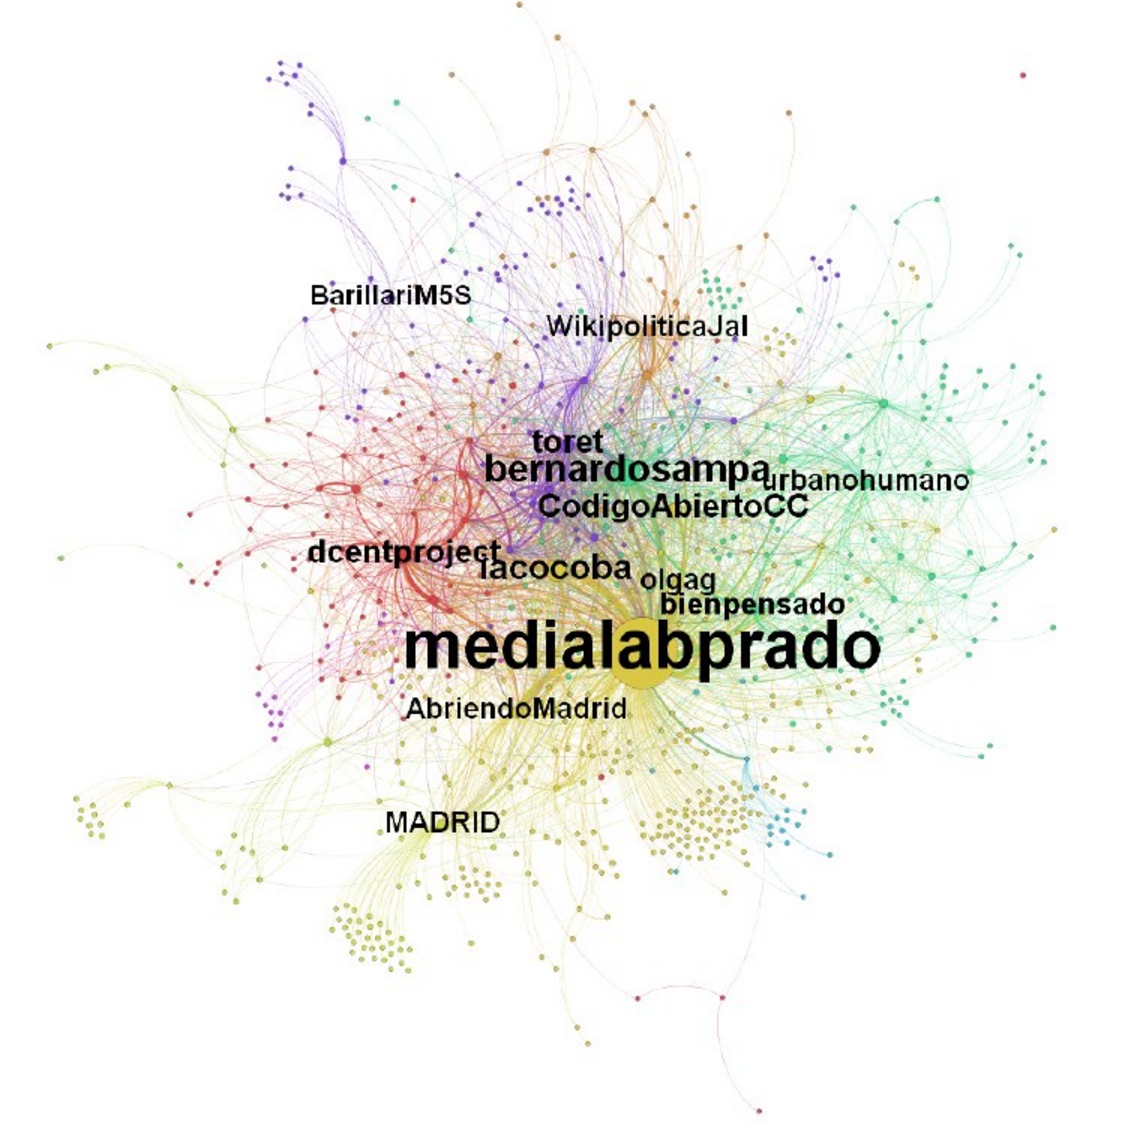 The network resulting from the #DemocracyLab, Democracy Lab event organised 23–27 May 2016. Picture by Pablo Aragón and Alberto Bicho.